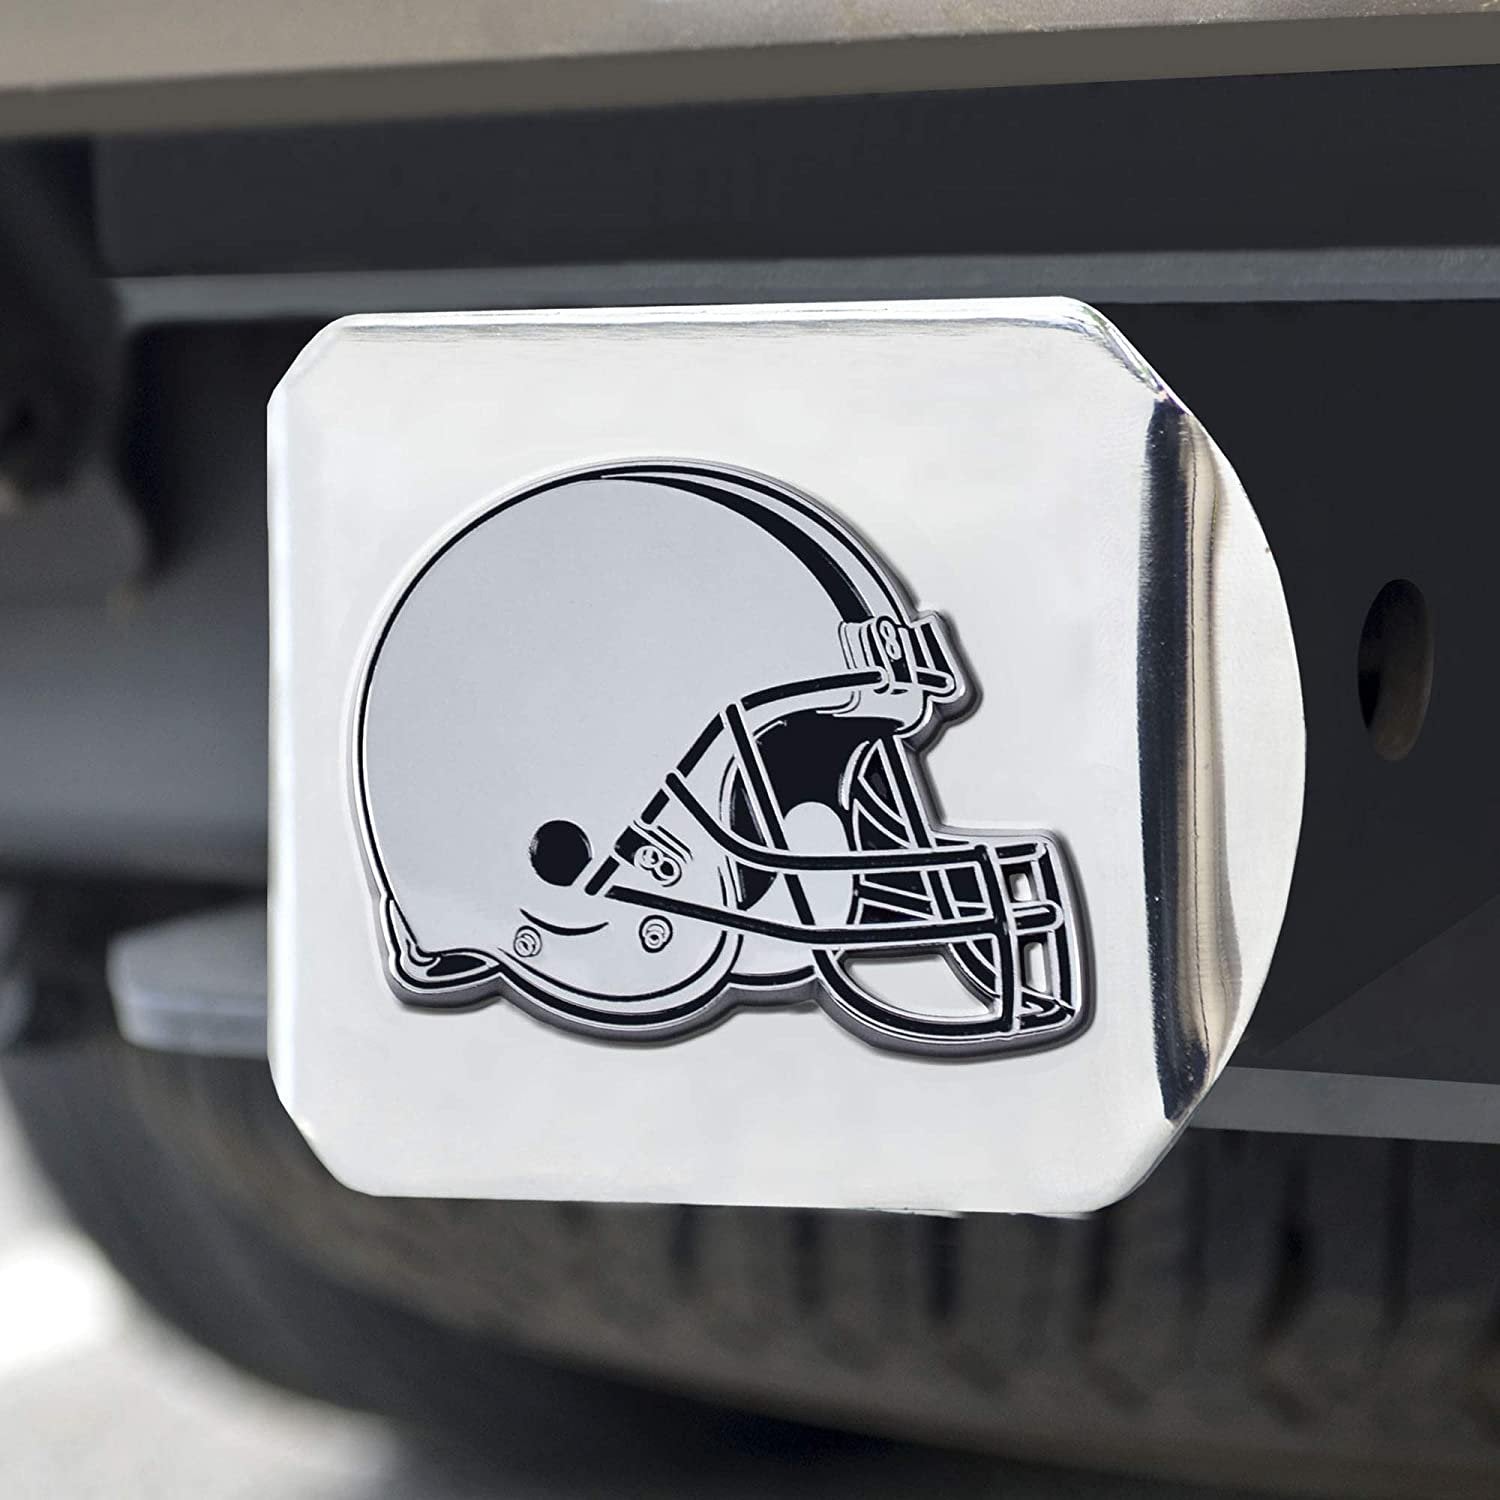 Cleveland Browns Hitch Cover Solid Metal with Raised Chrome Metal Emblem 2" Square Type III